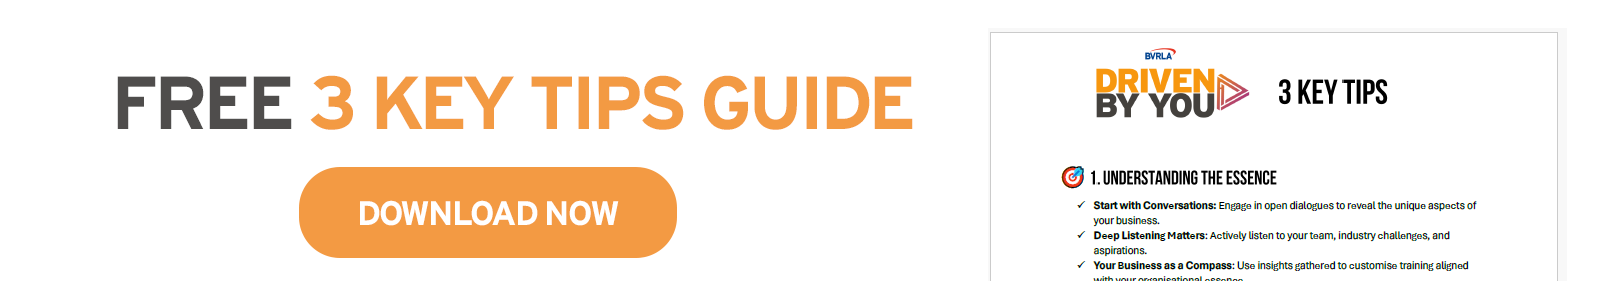 key tips guide banner.png